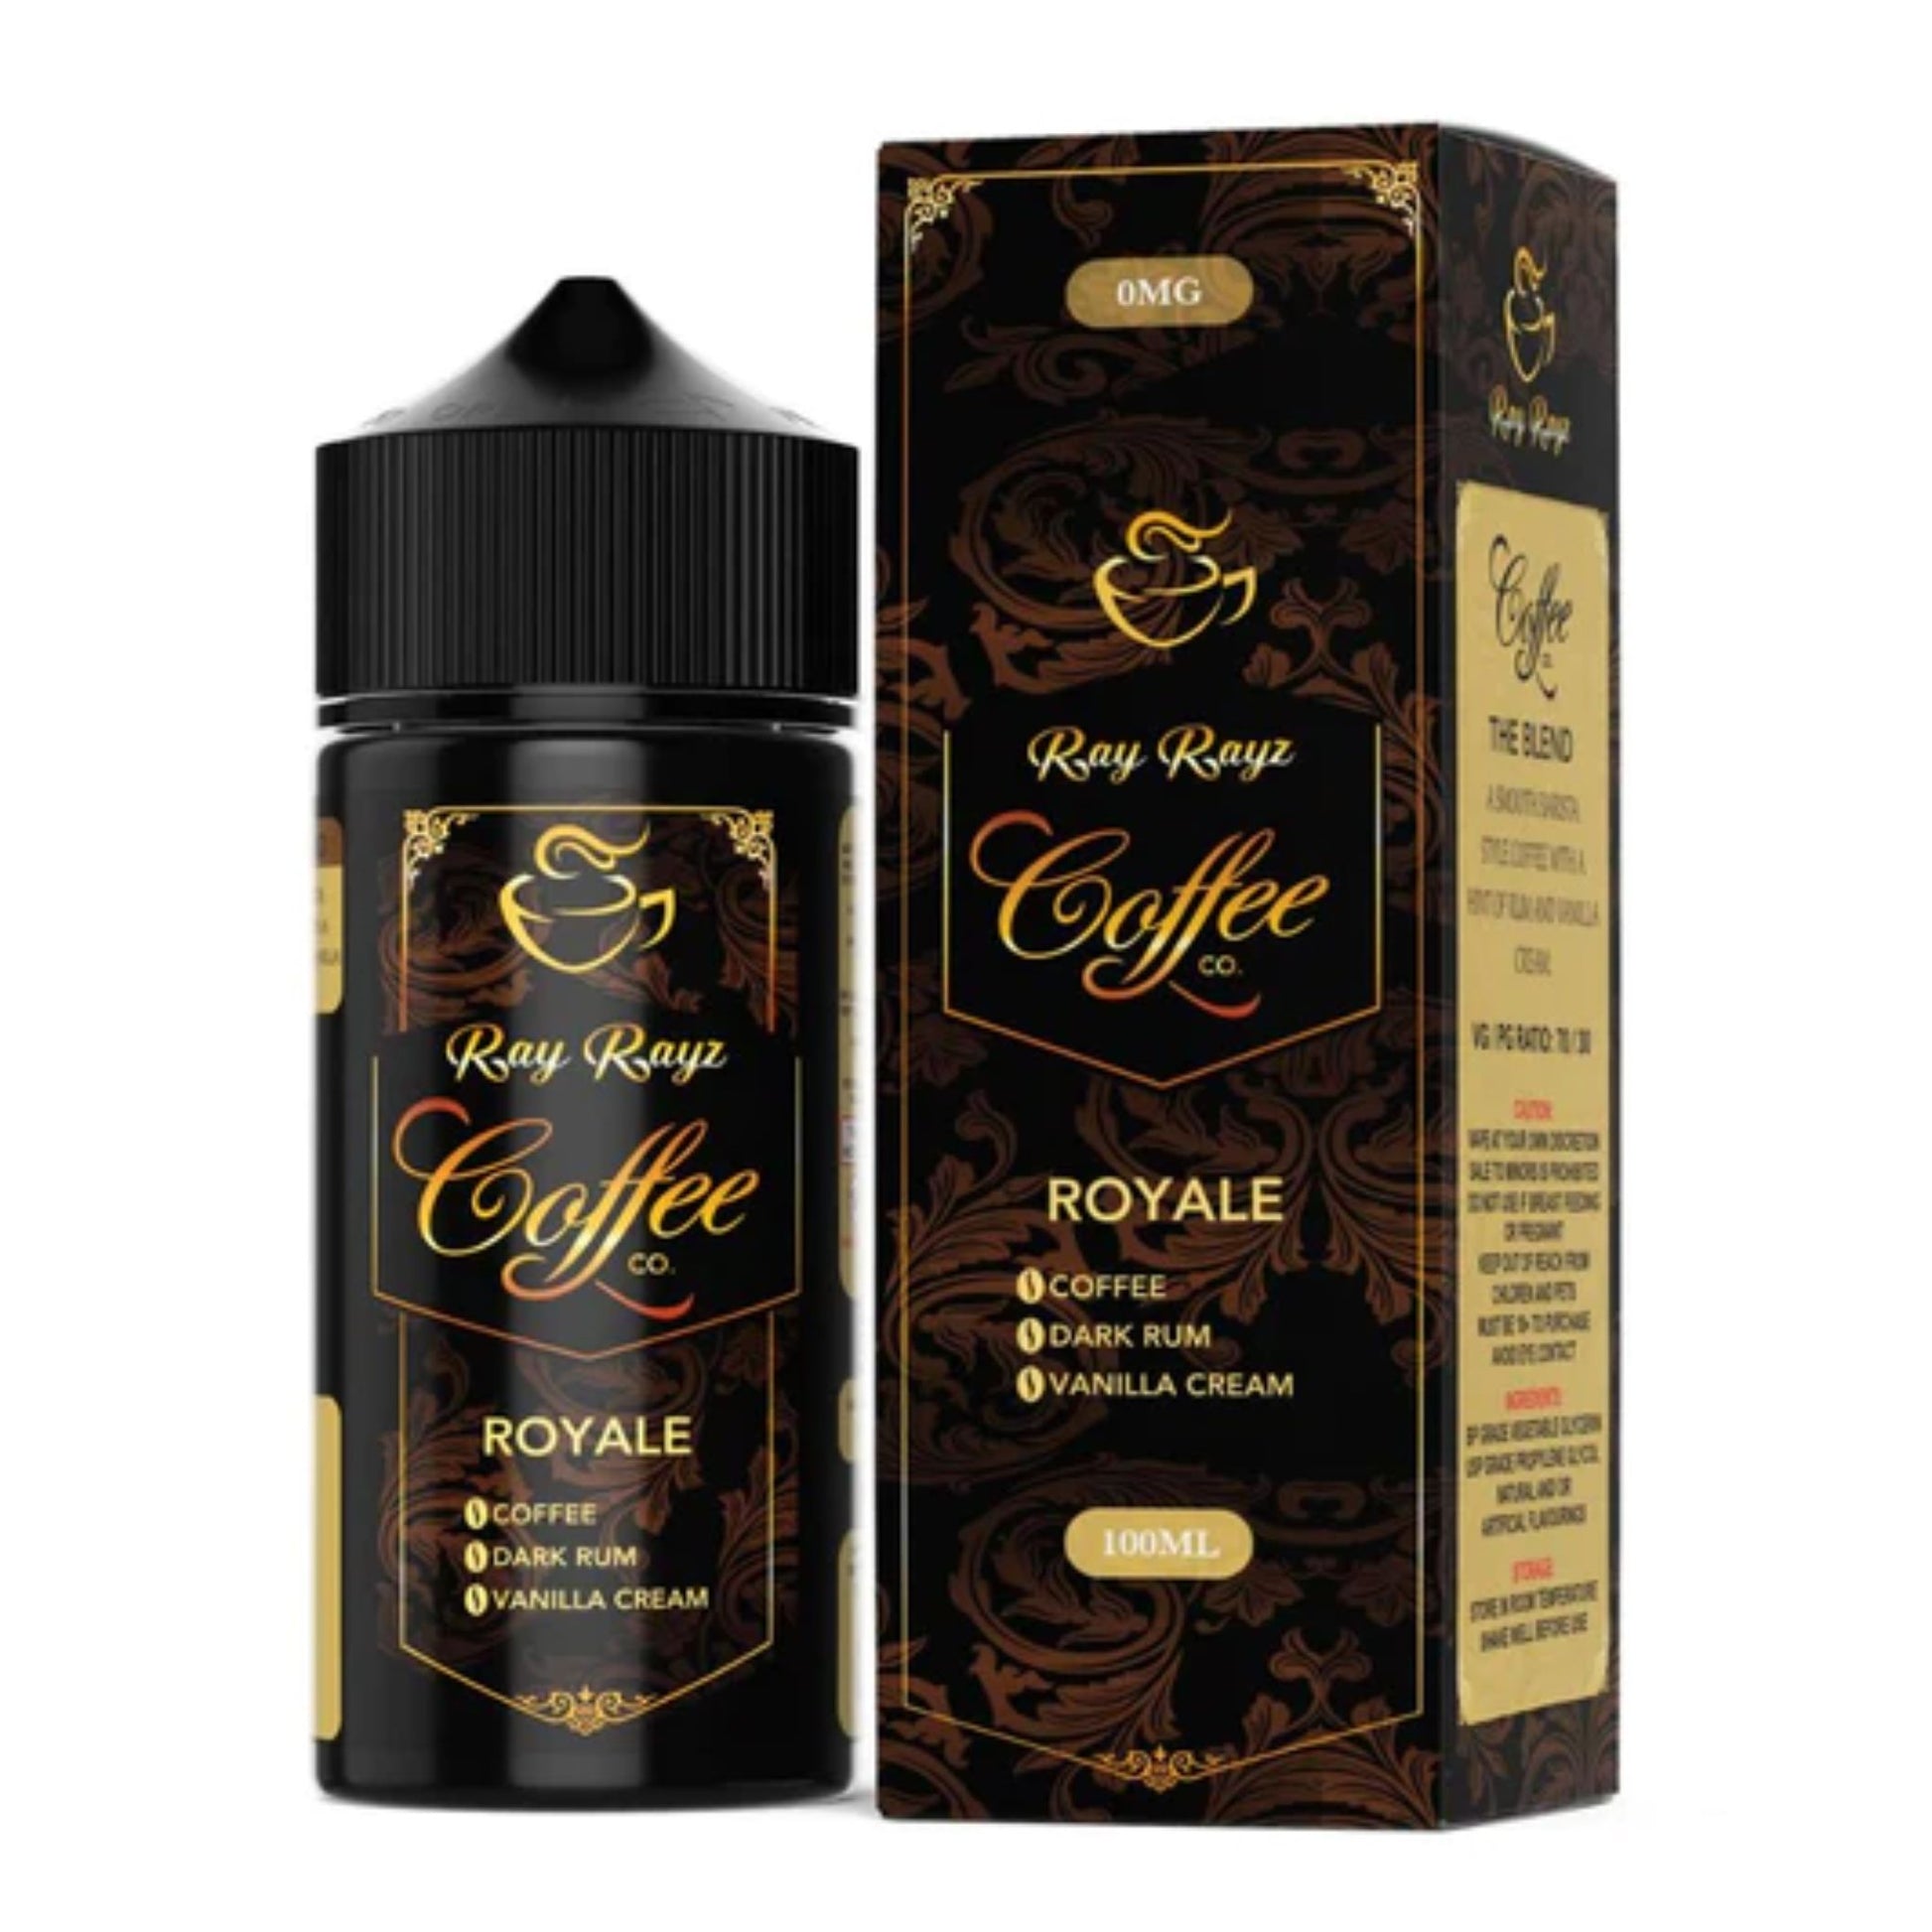 Ray Rayz Coffee Co | Royale | 100ml bottle and box